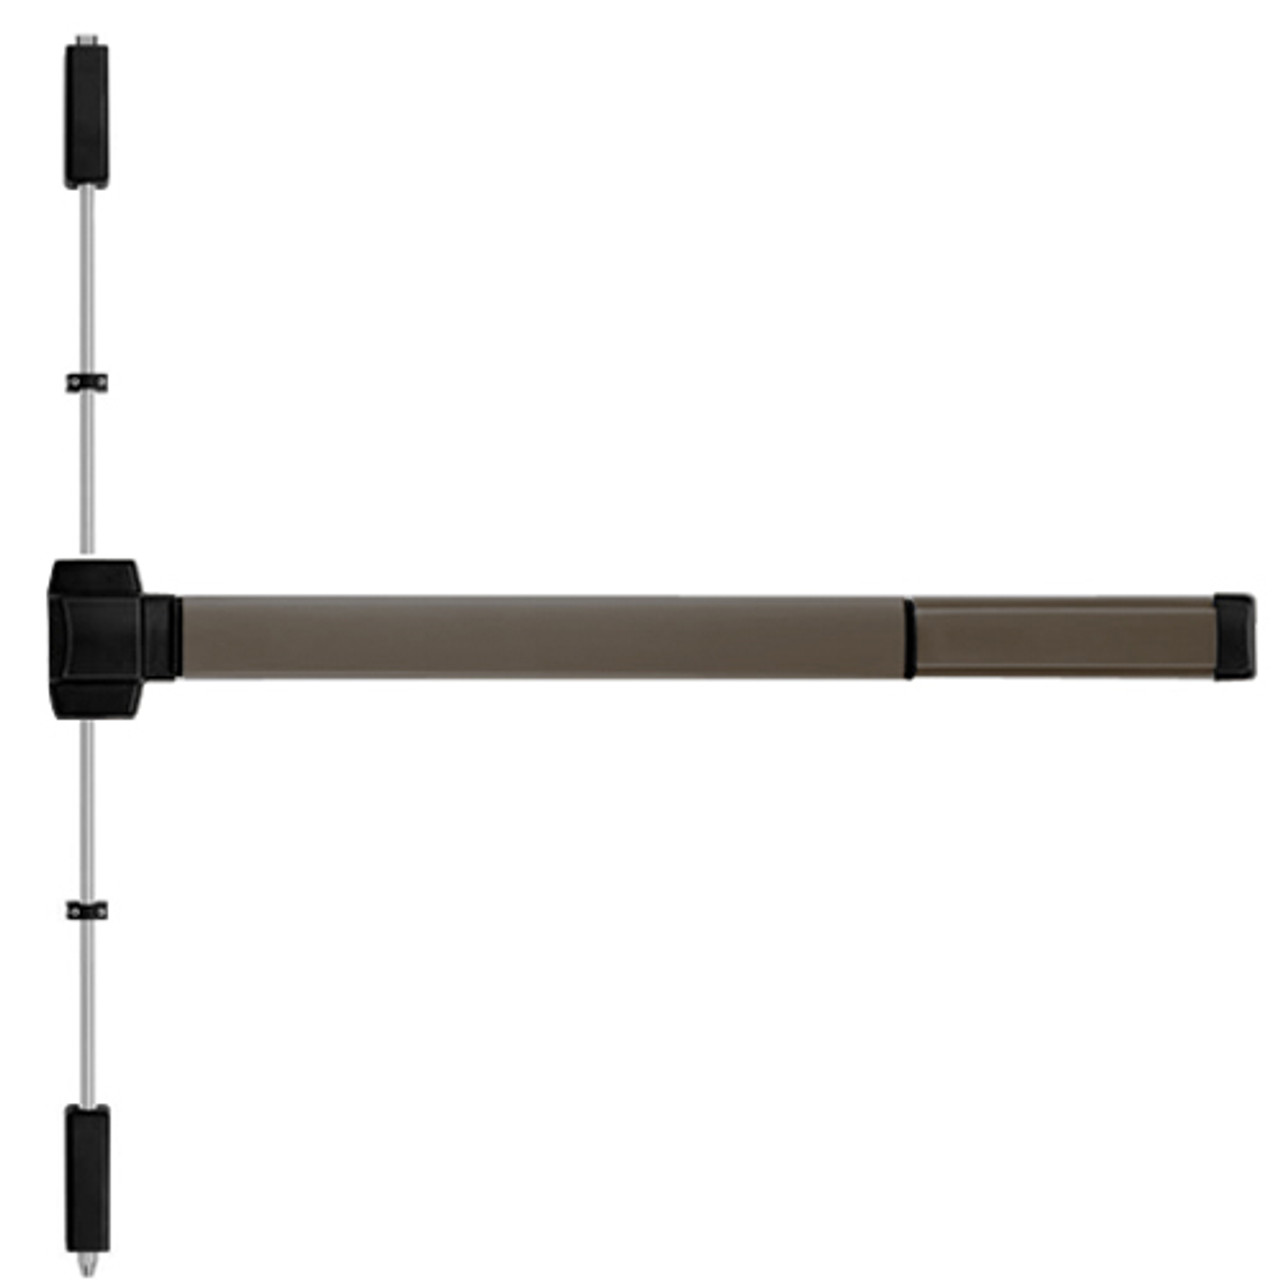 5203LBR-695-48 PHI 5000 Series Non Fire Rated Reliant Surface Vertical Rod Device Prepped for Key Retracts Latchbolt in Dark Bronze Powder Coat Finish